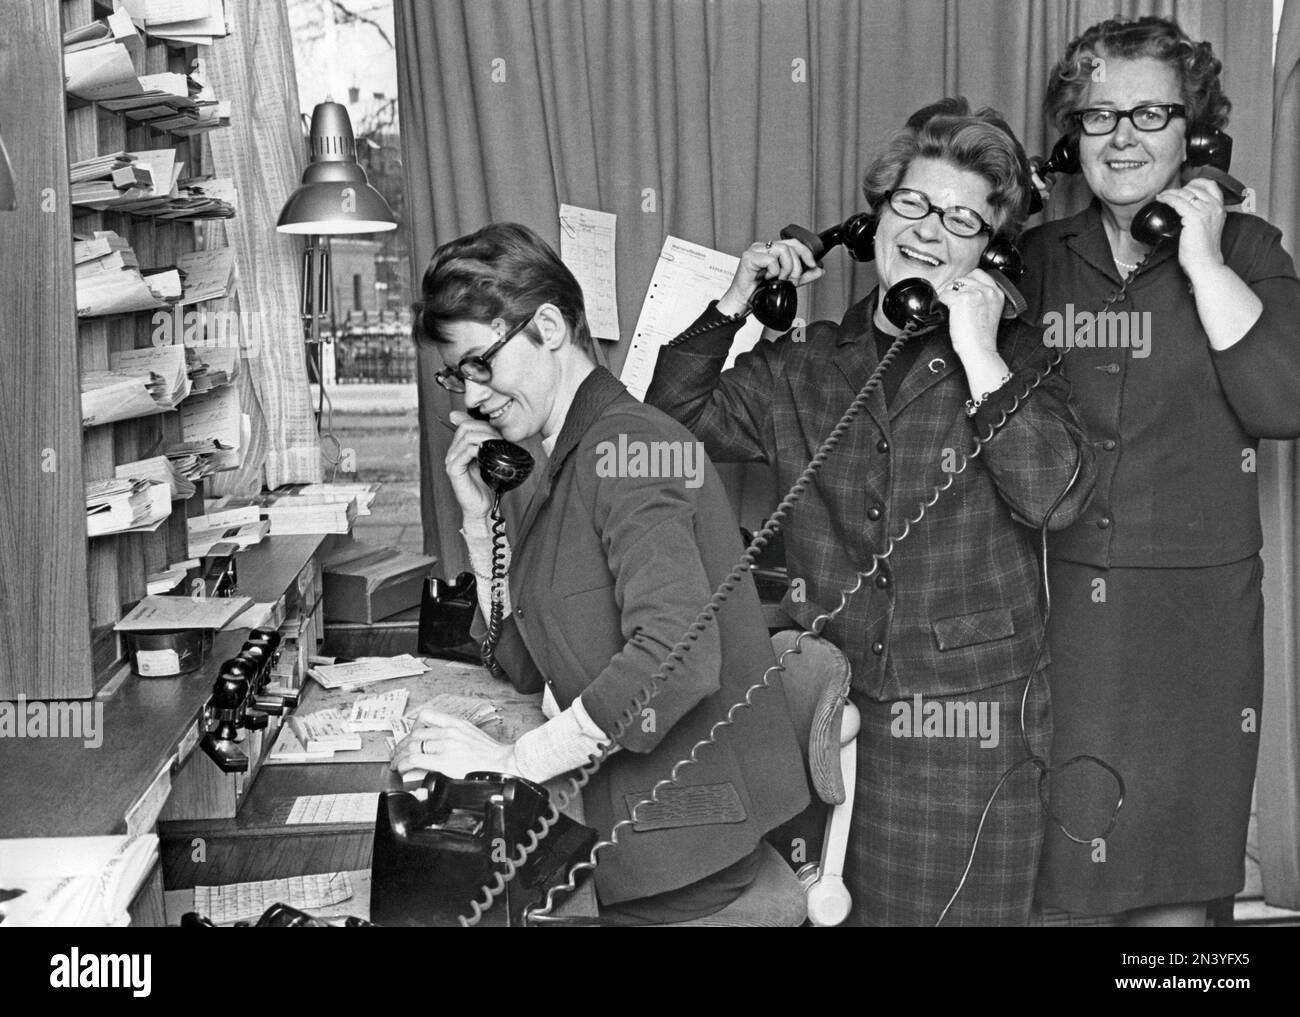 In the 1960s. Three women having fun at work, holding multiple telephones and laughing. Sweden 1967 Stock Photo